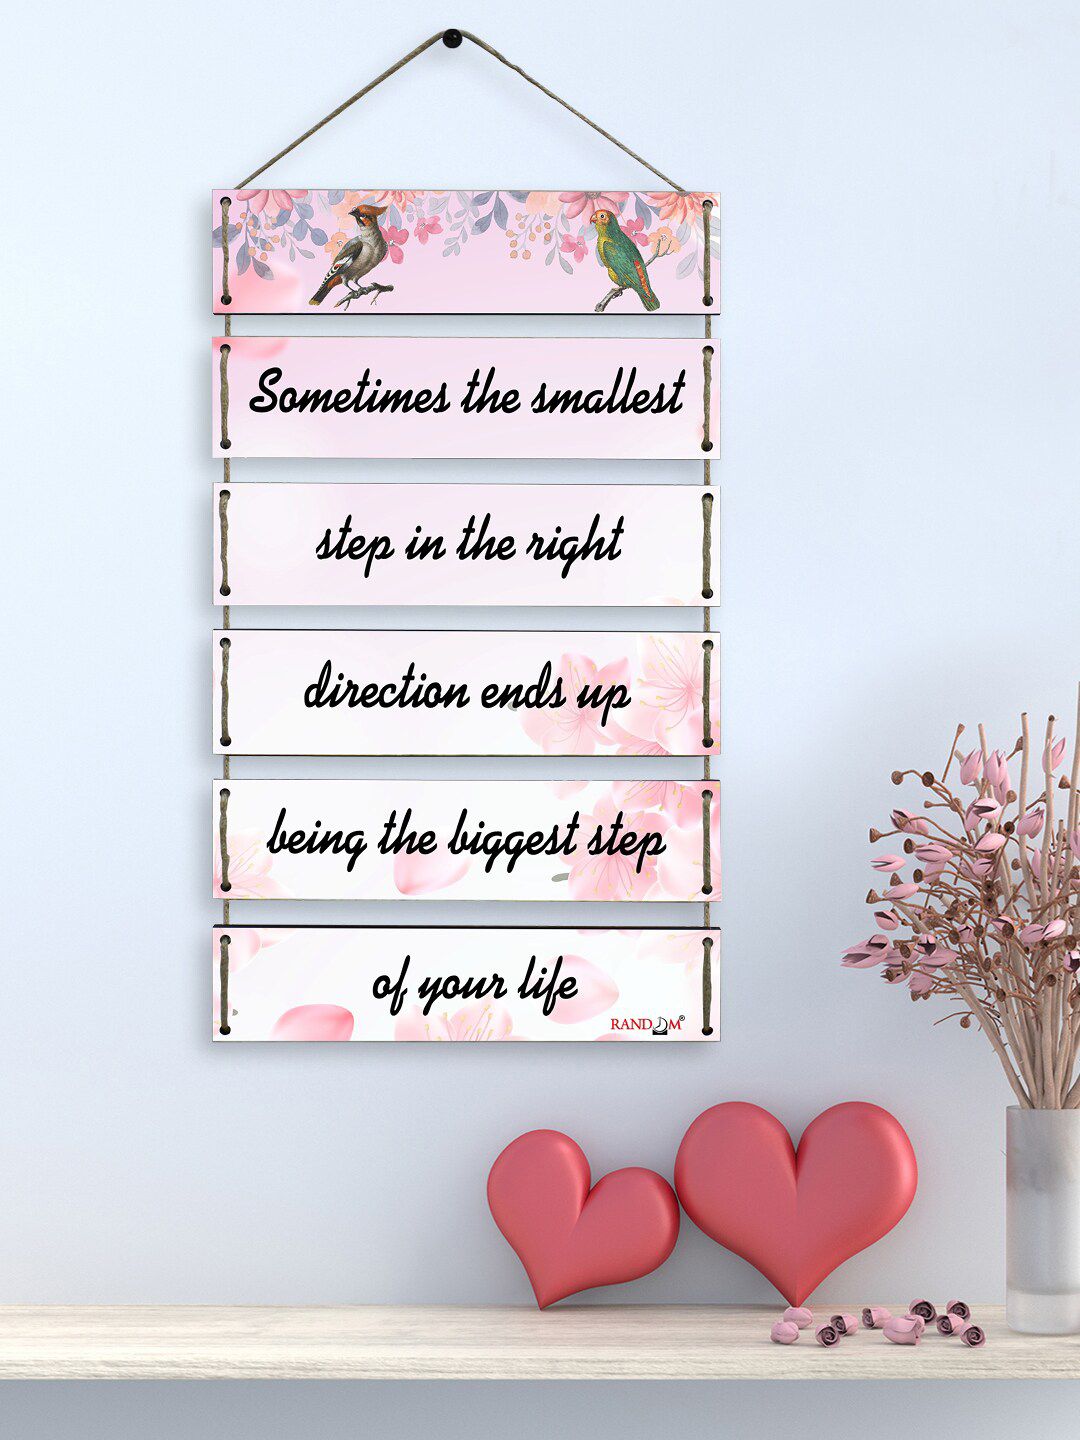 RANDOM Pink Motivational Quotes Wooden Wall Hangings Price in India